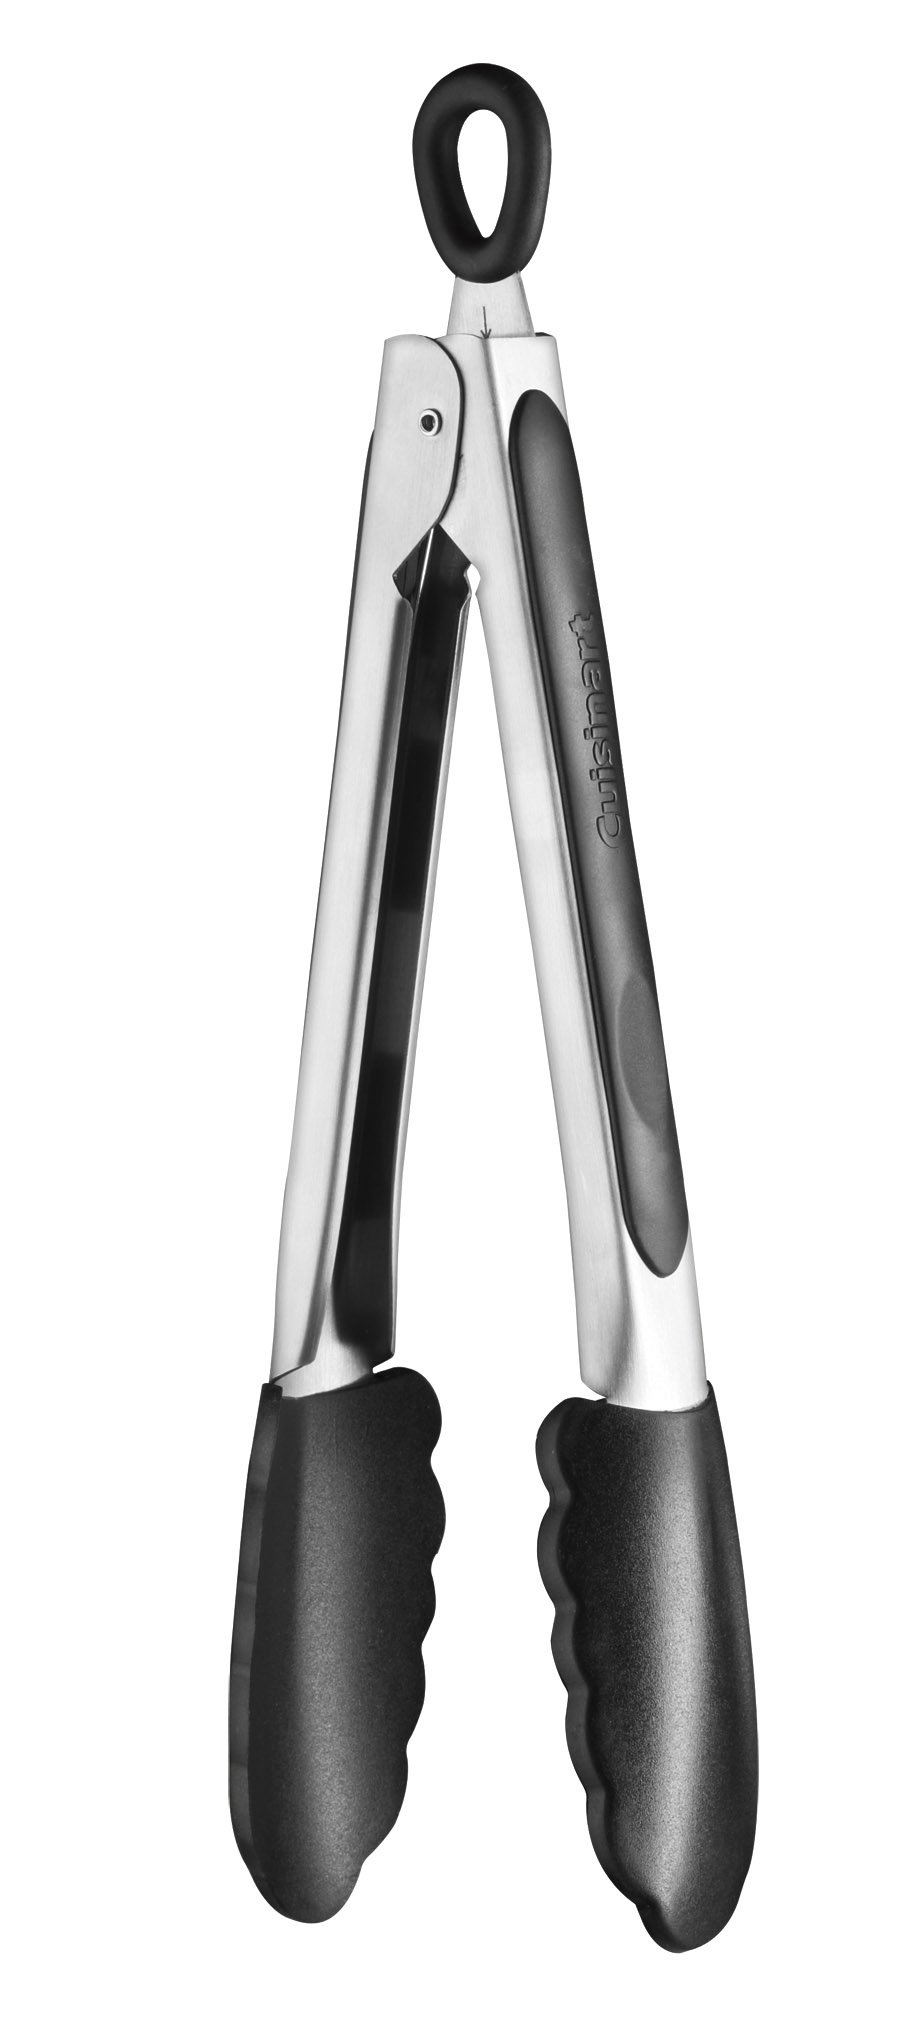 9" Cuisinart Stainless Steel Silicone-Tipped Kitchen Tongs (Black) $5.09 + Shipping is free w/ Walmart+ or on orders $35+